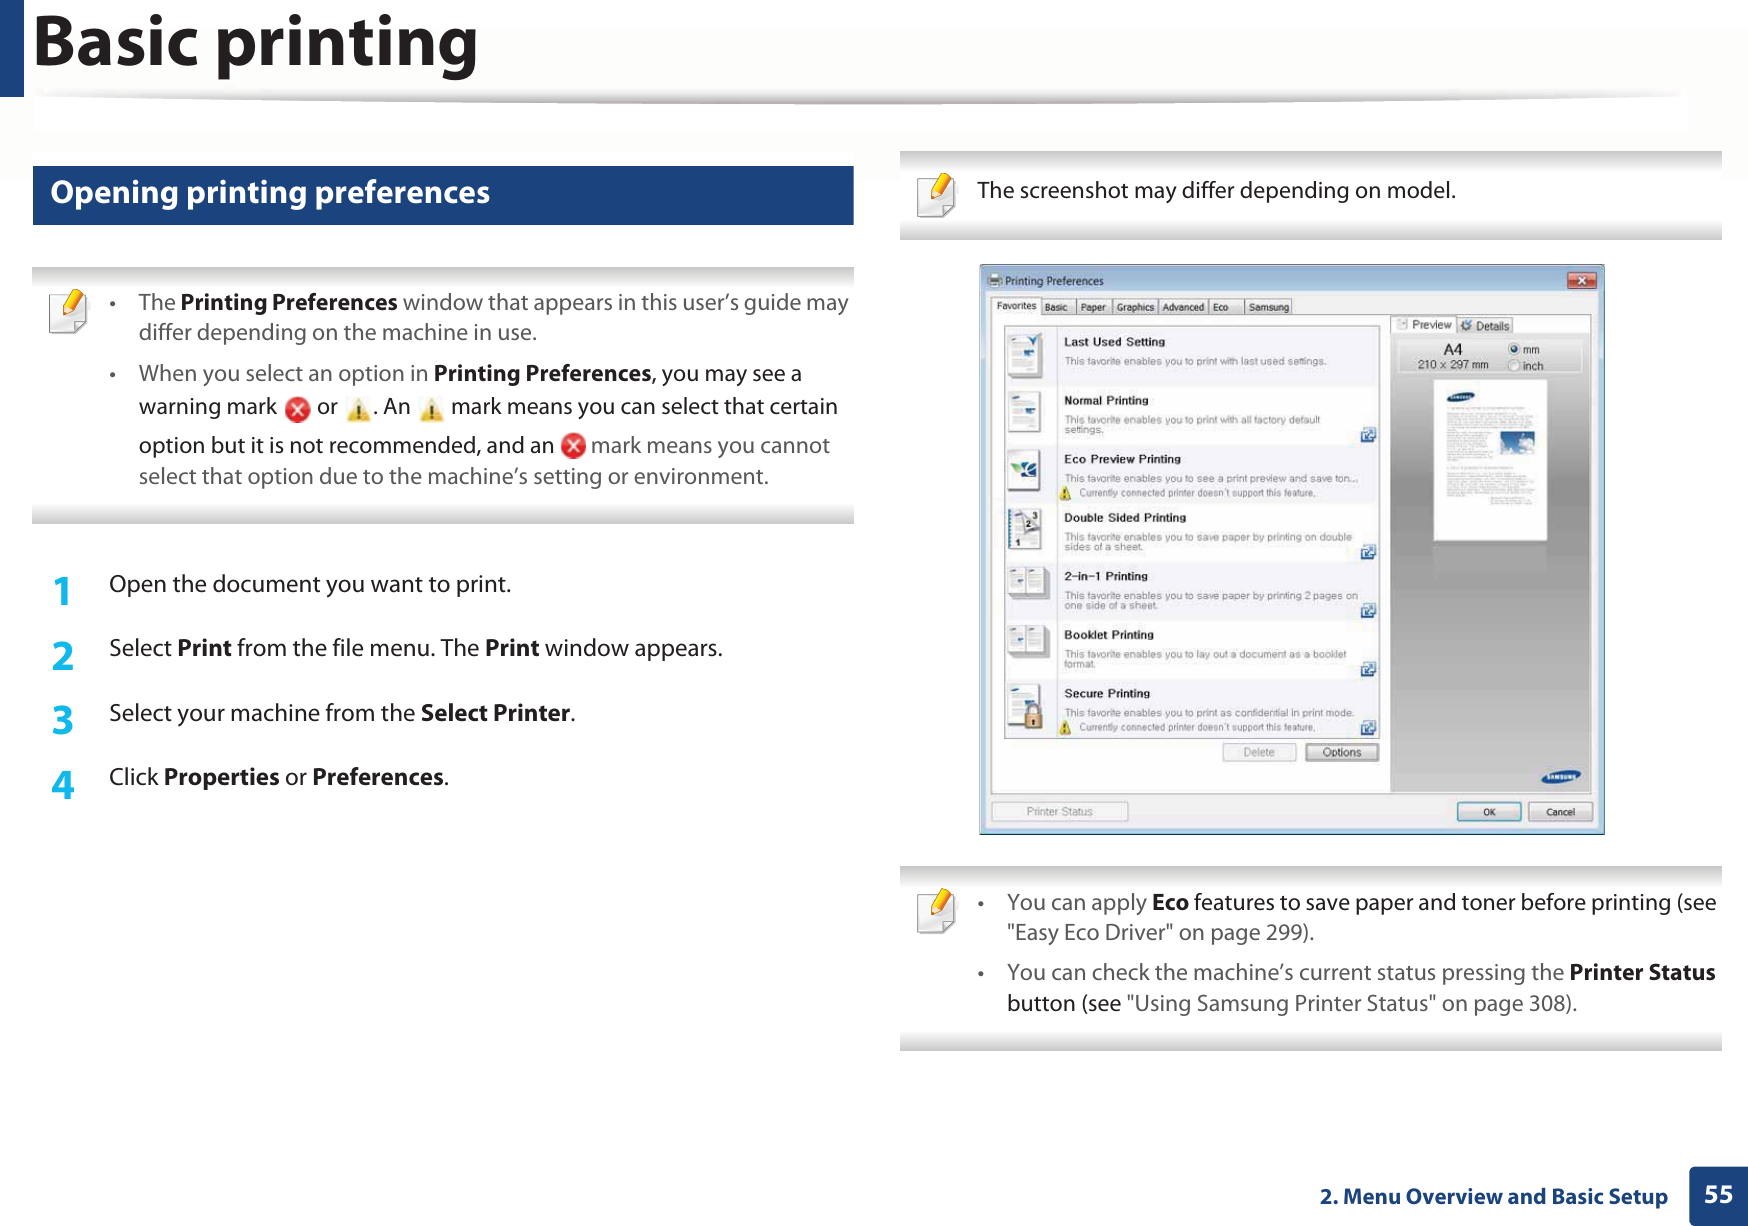 Basic printing552. Menu Overview and Basic Setup11 Opening printing preferences • The Printing Preferences window that appears in this user’s guide may differ depending on the machine in use. • When you select an option in Printing Preferences, you may see a warning mark   or  . An   mark means you can select that certain option but it is not recommended, and an   mark means you cannot select that option due to the machine’s setting or environment. 1Open the document you want to print.2  Select Print from the file menu. The Print window appears. 3  Select your machine from the Select Printer. 4  Click Properties or Preferences.  The screenshot may differ depending on model.  • You can apply Eco features to save paper and toner before printing (see &quot;Easy Eco Driver&quot; on page 299).• You can check the machine’s current status pressing the Printer Status button (see &quot;Using Samsung Printer Status&quot; on page 308). 